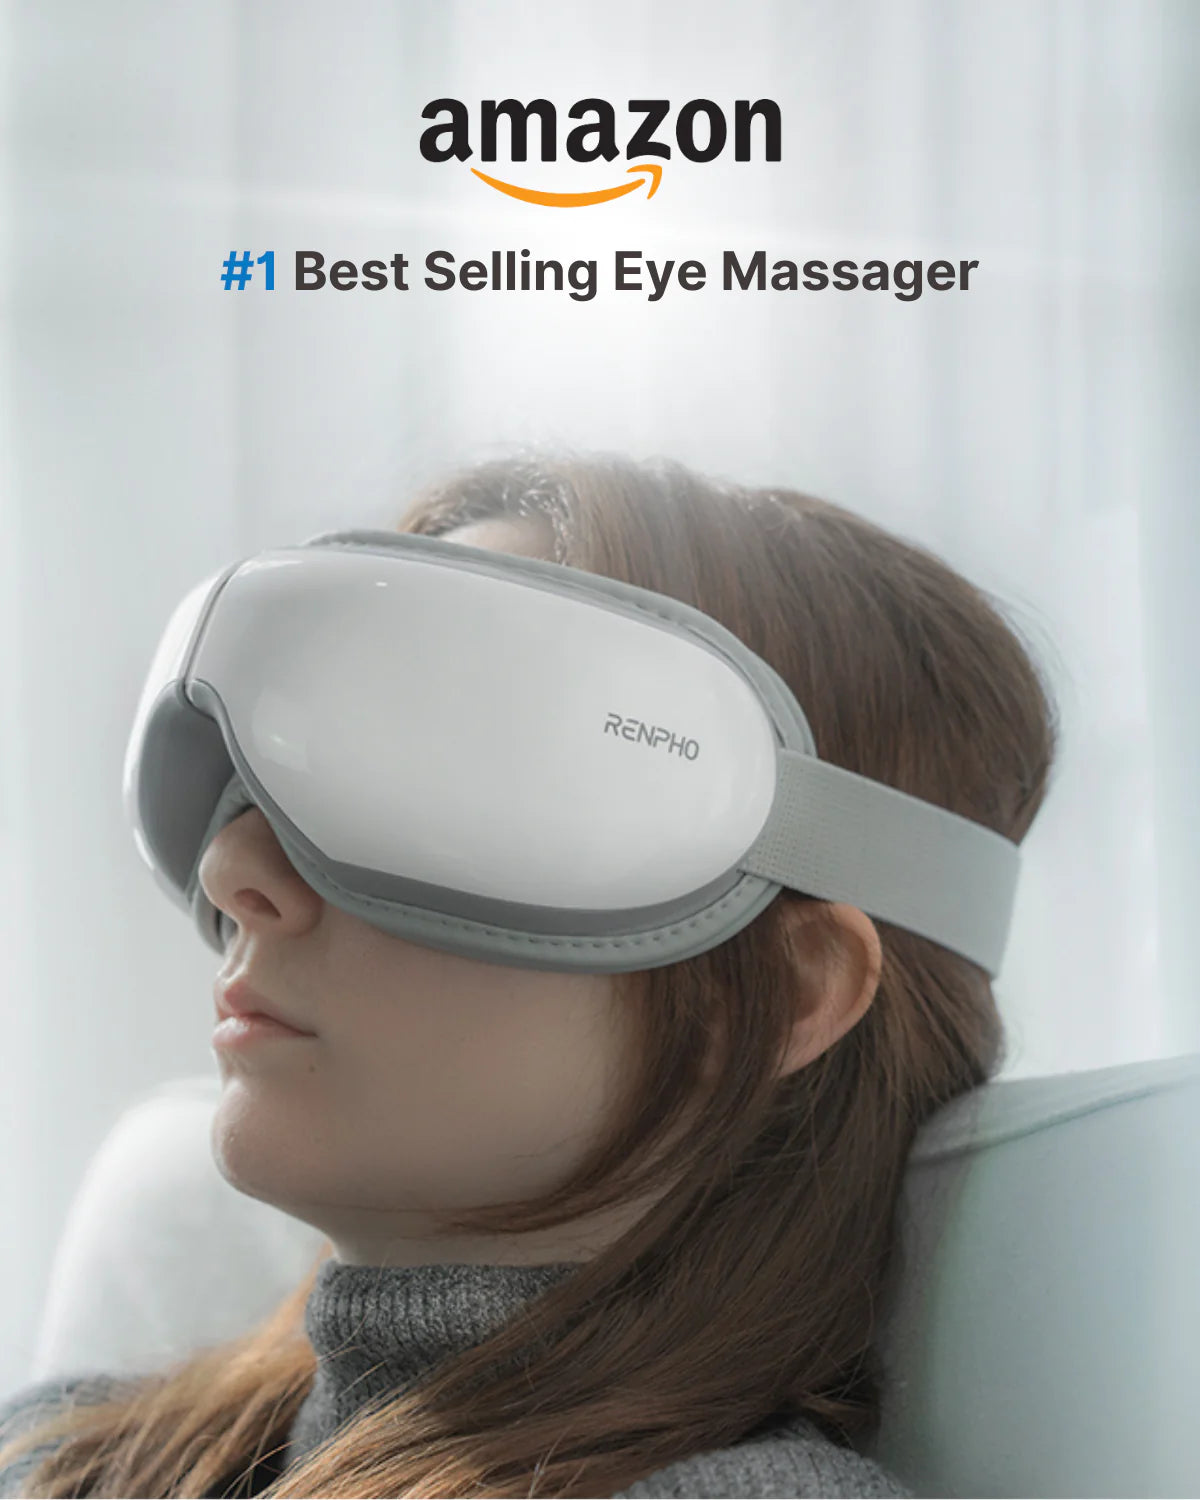 A woman relaxes in a chair wearing a Renpho EU Eyeris 1 Eye Massager labeled as "#1 best selling eye massager" on Amazon. The image emphasizes comfort and health, portraying migraine relief.